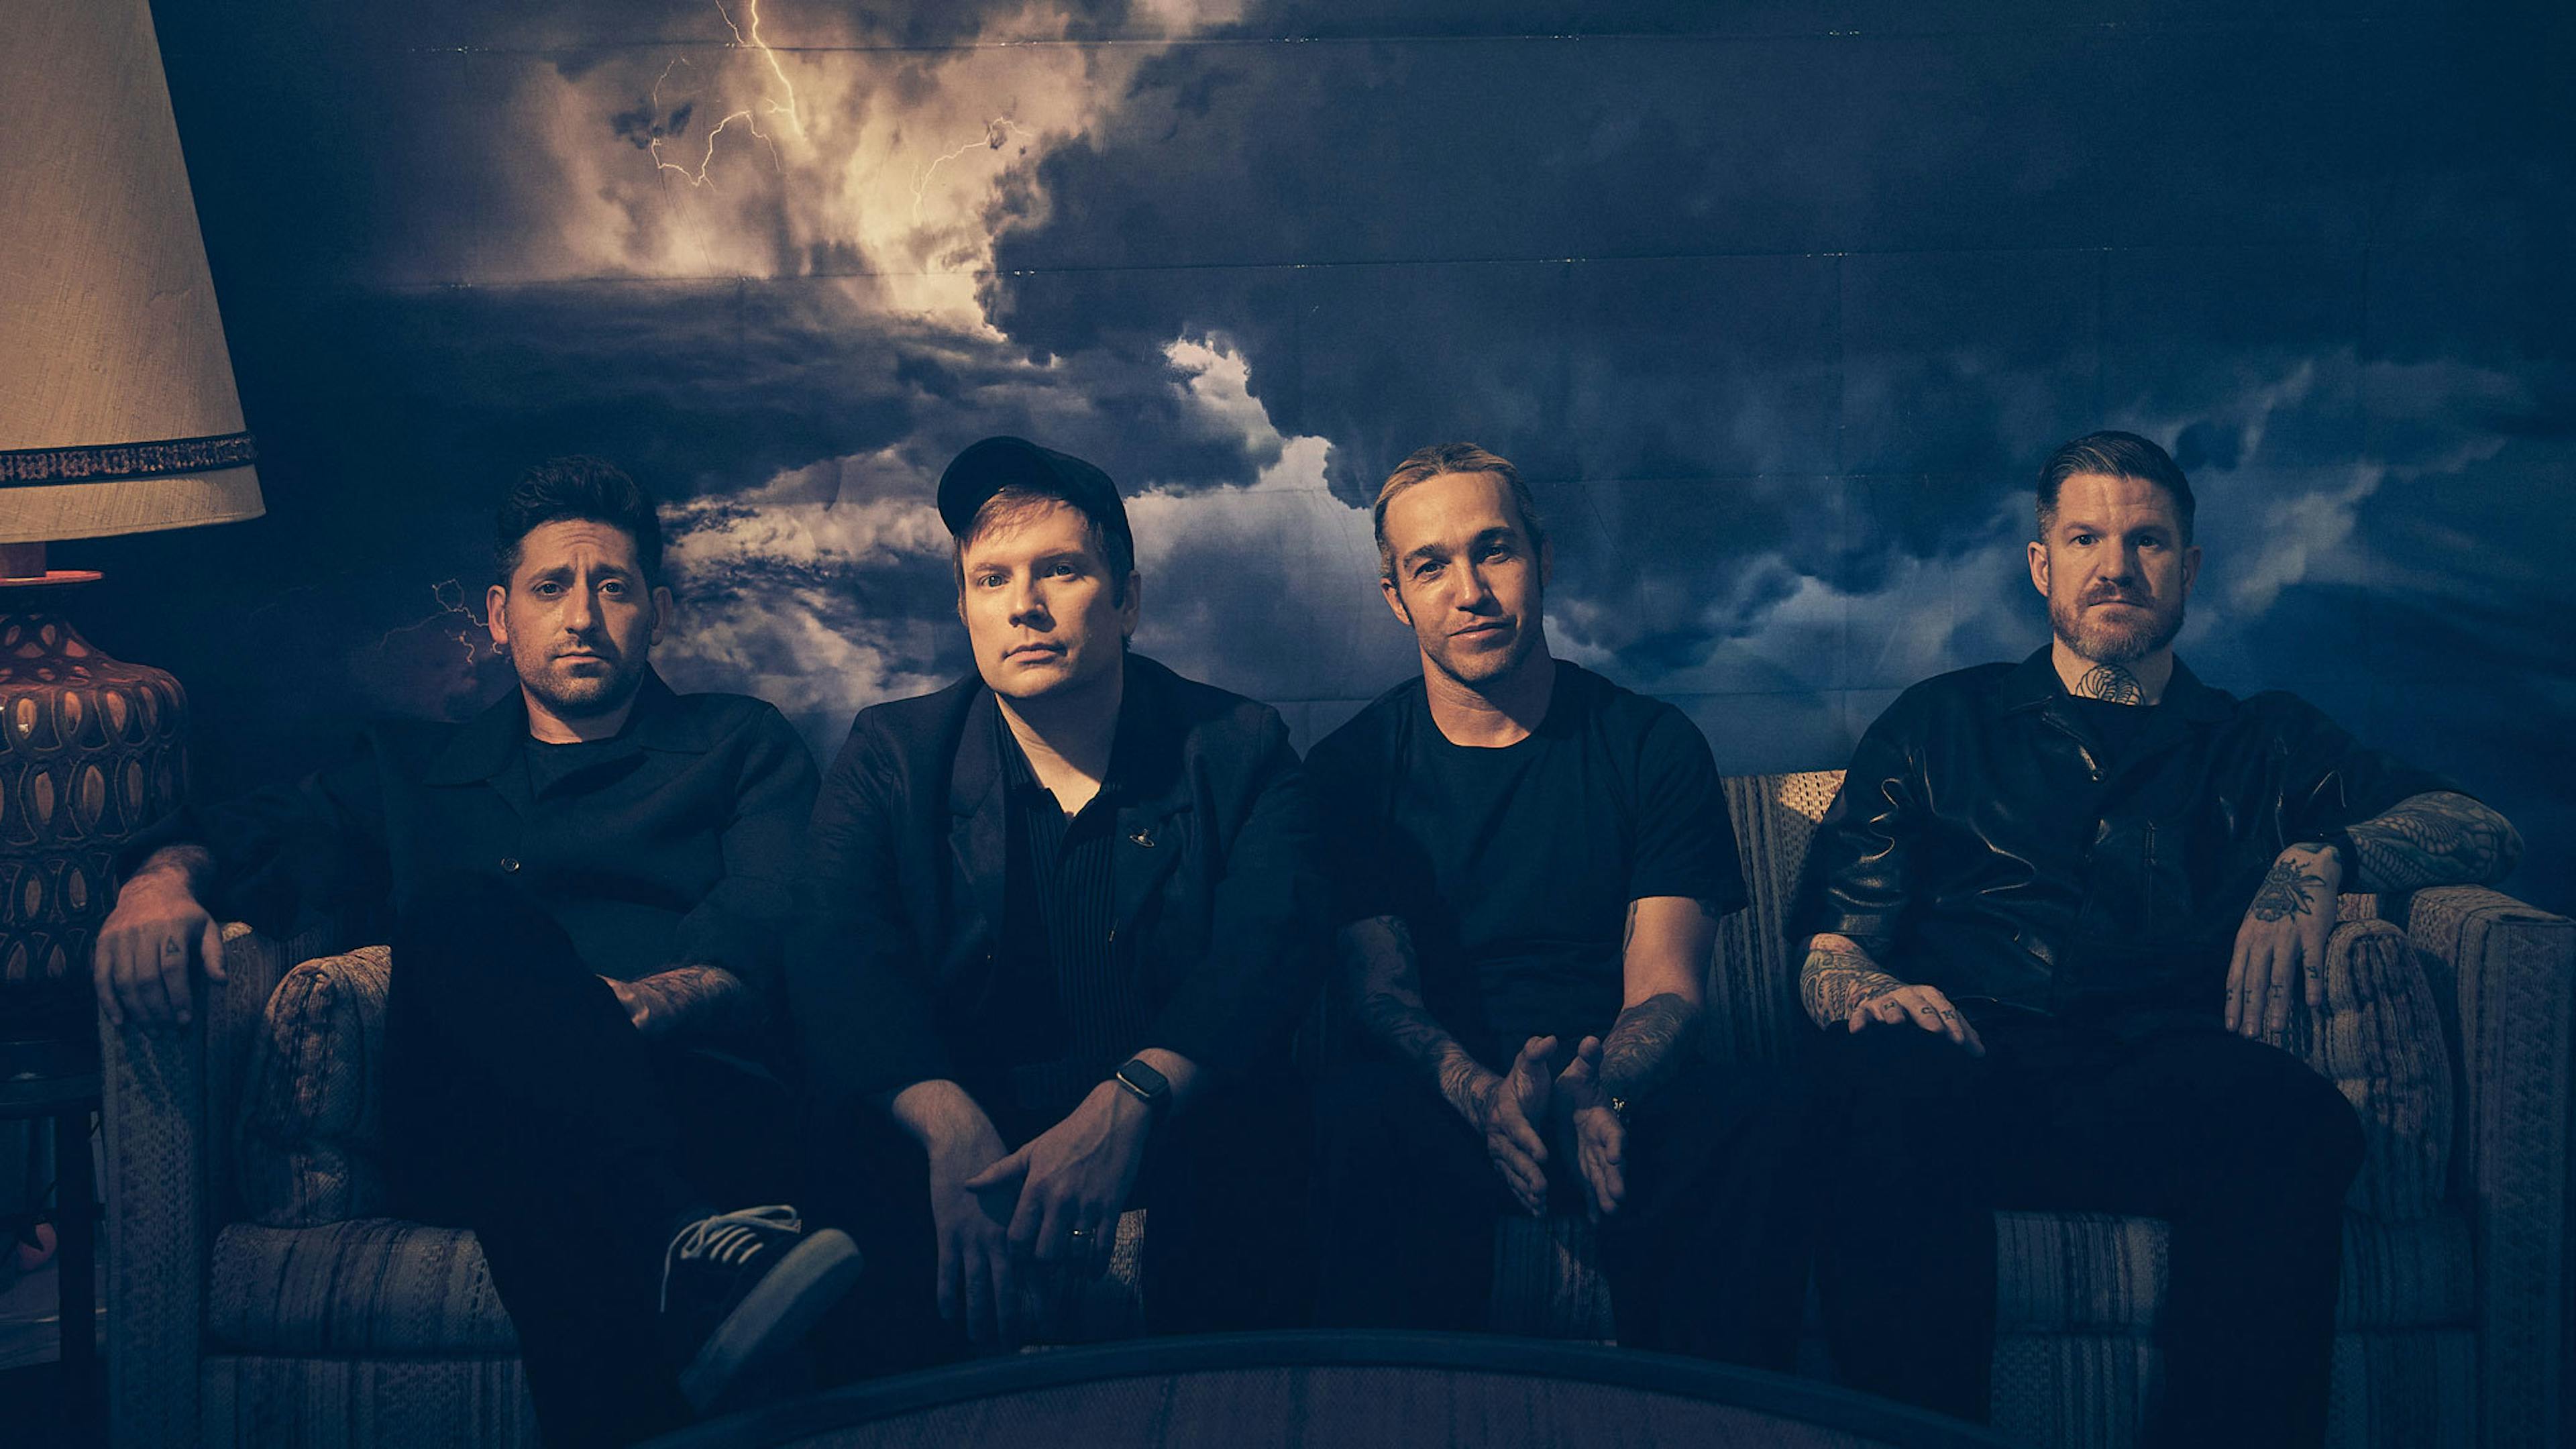 Listen: Fall Out Boy have updated Billy Joel’s We Didn’t Start The Fire with new cover